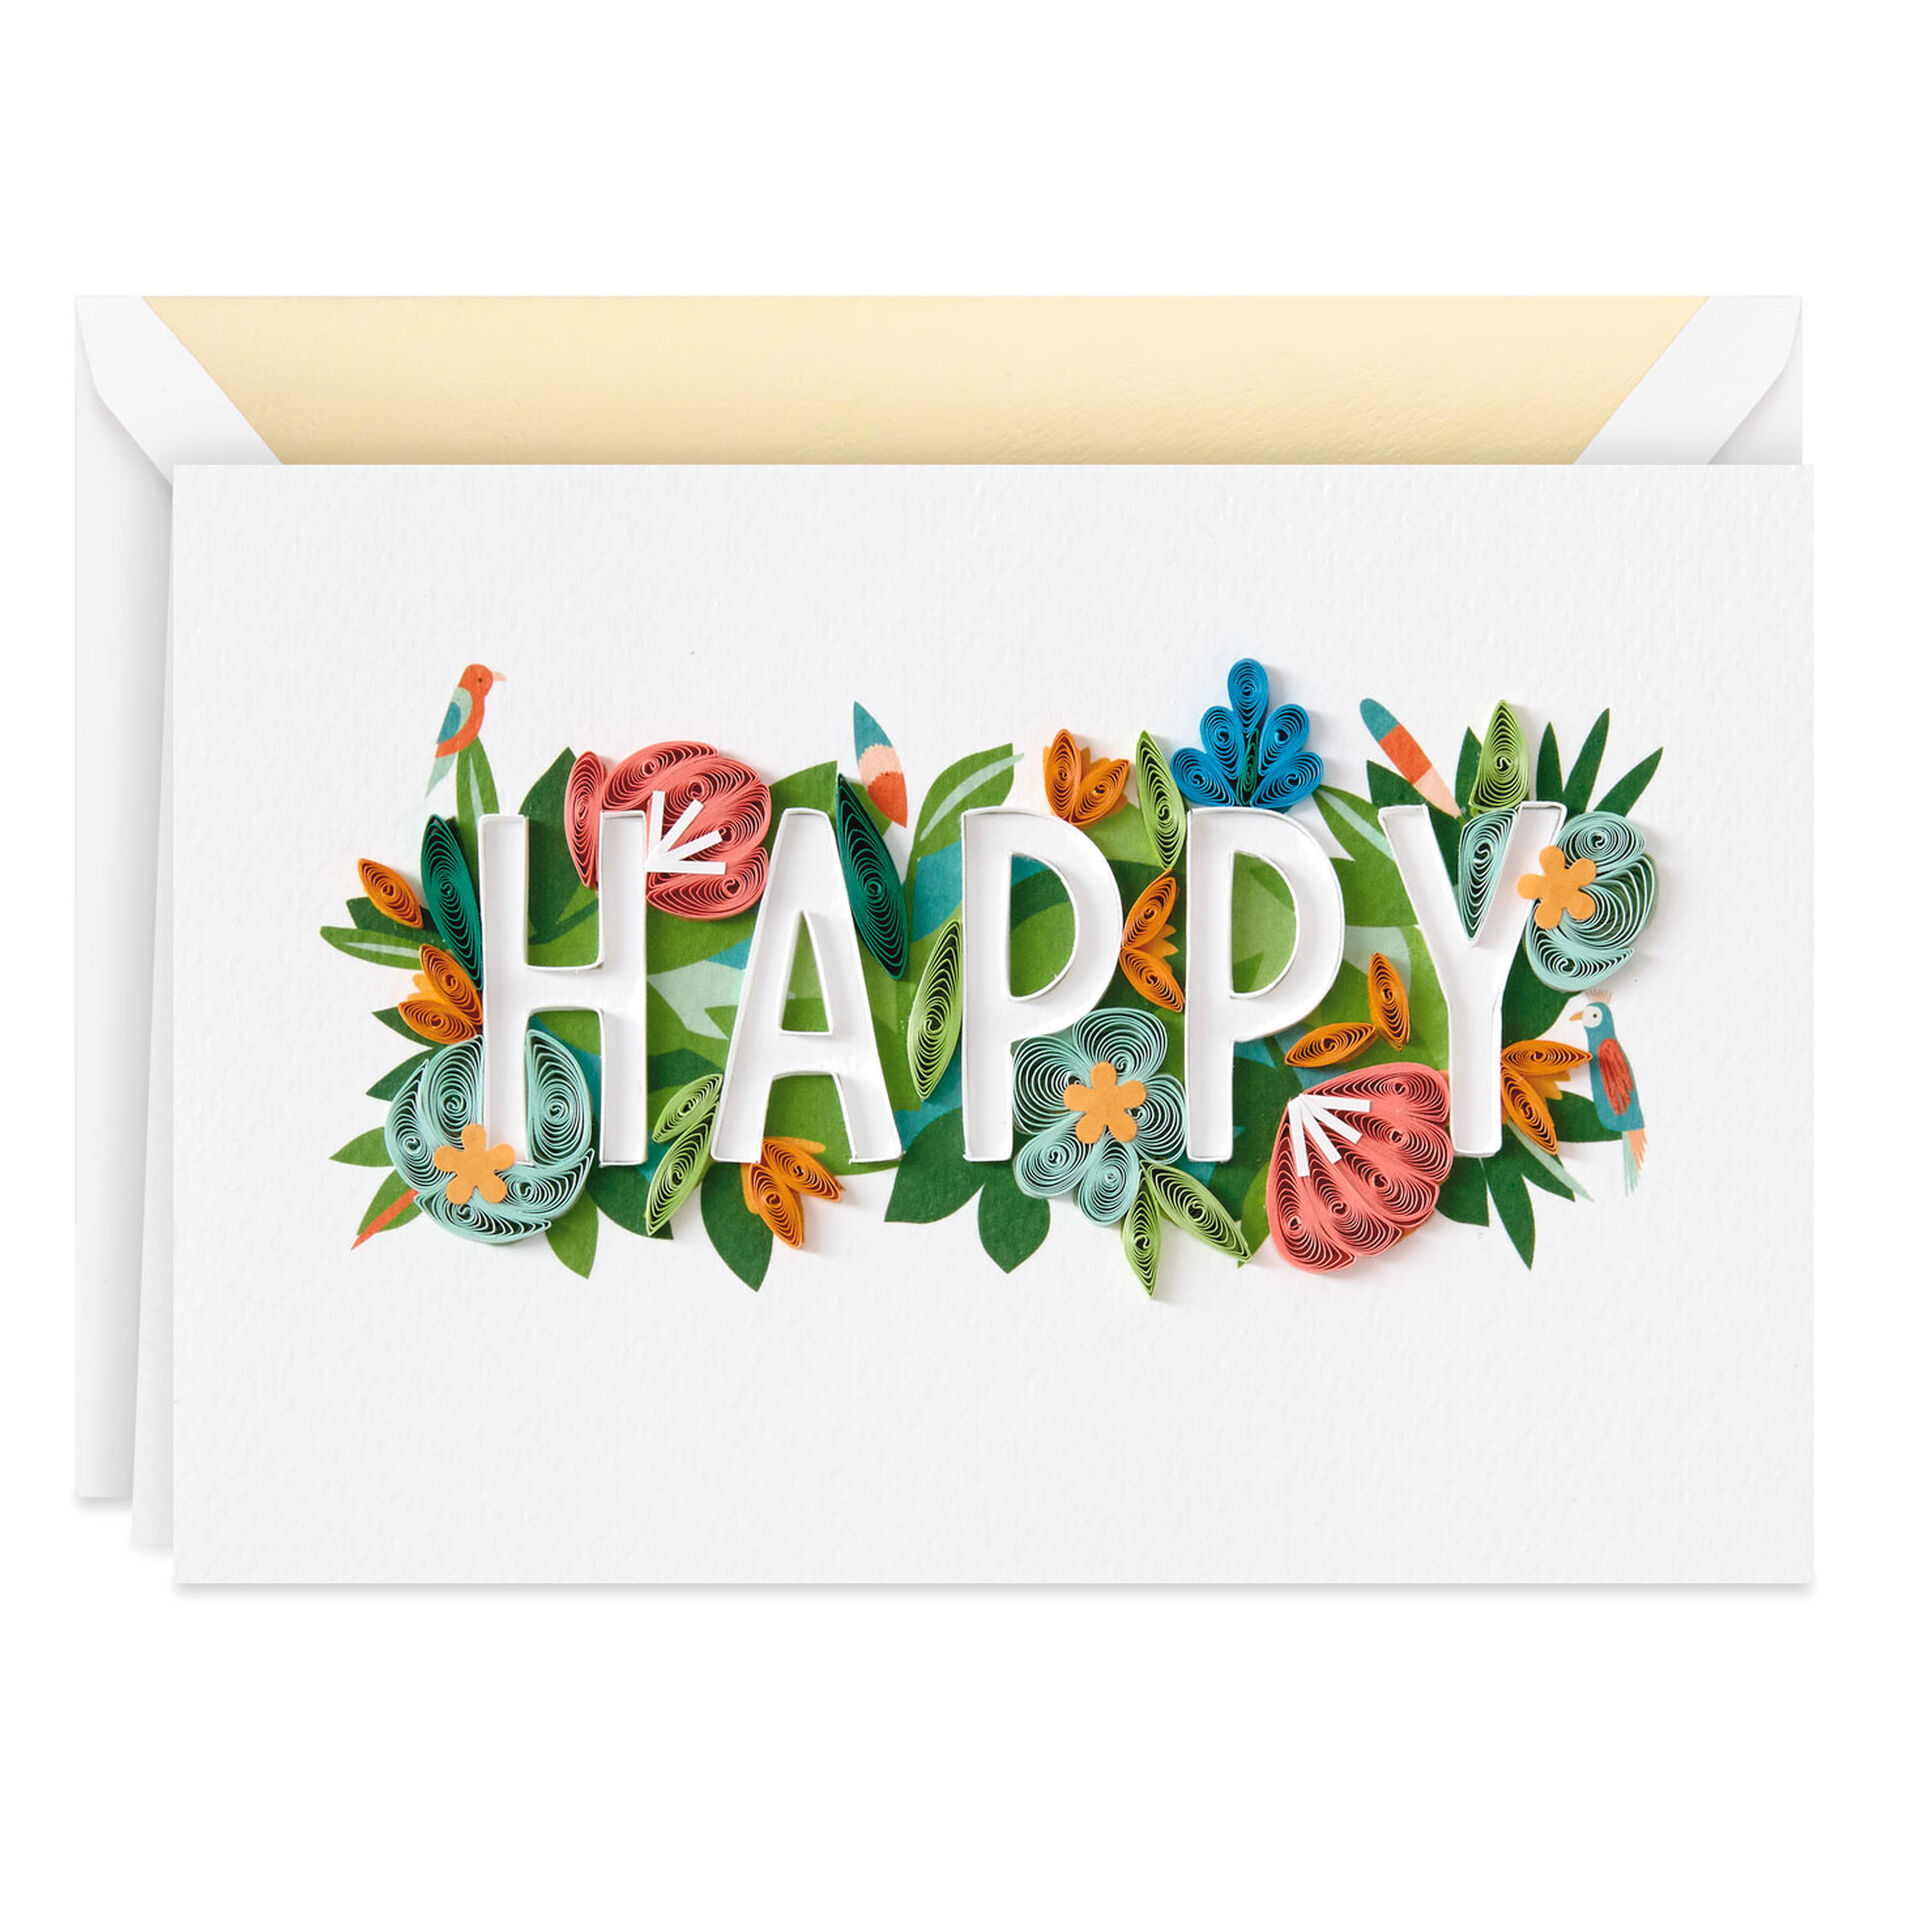 Happy-and-Flowers-Quilled-Paper-Birthday-Card-for-Her_1299LAD2728_01